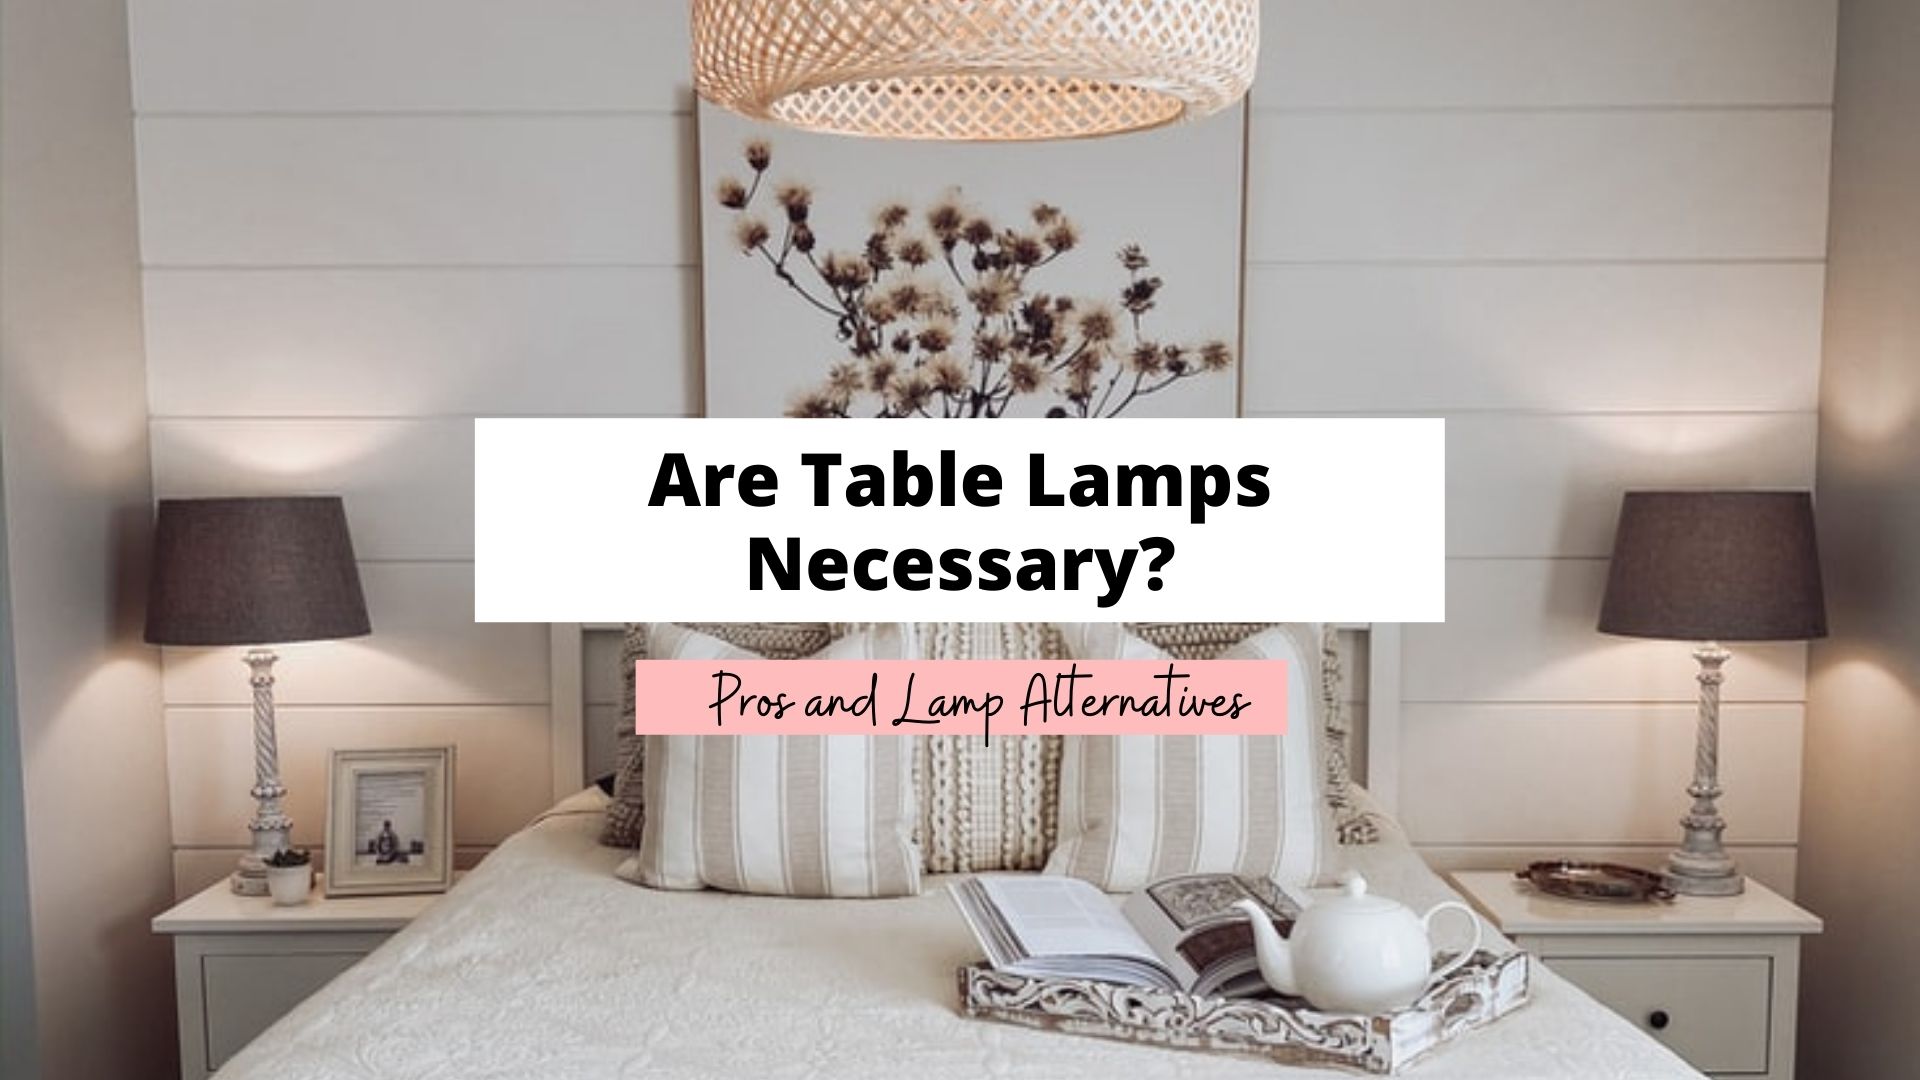 Are table lamps necessary